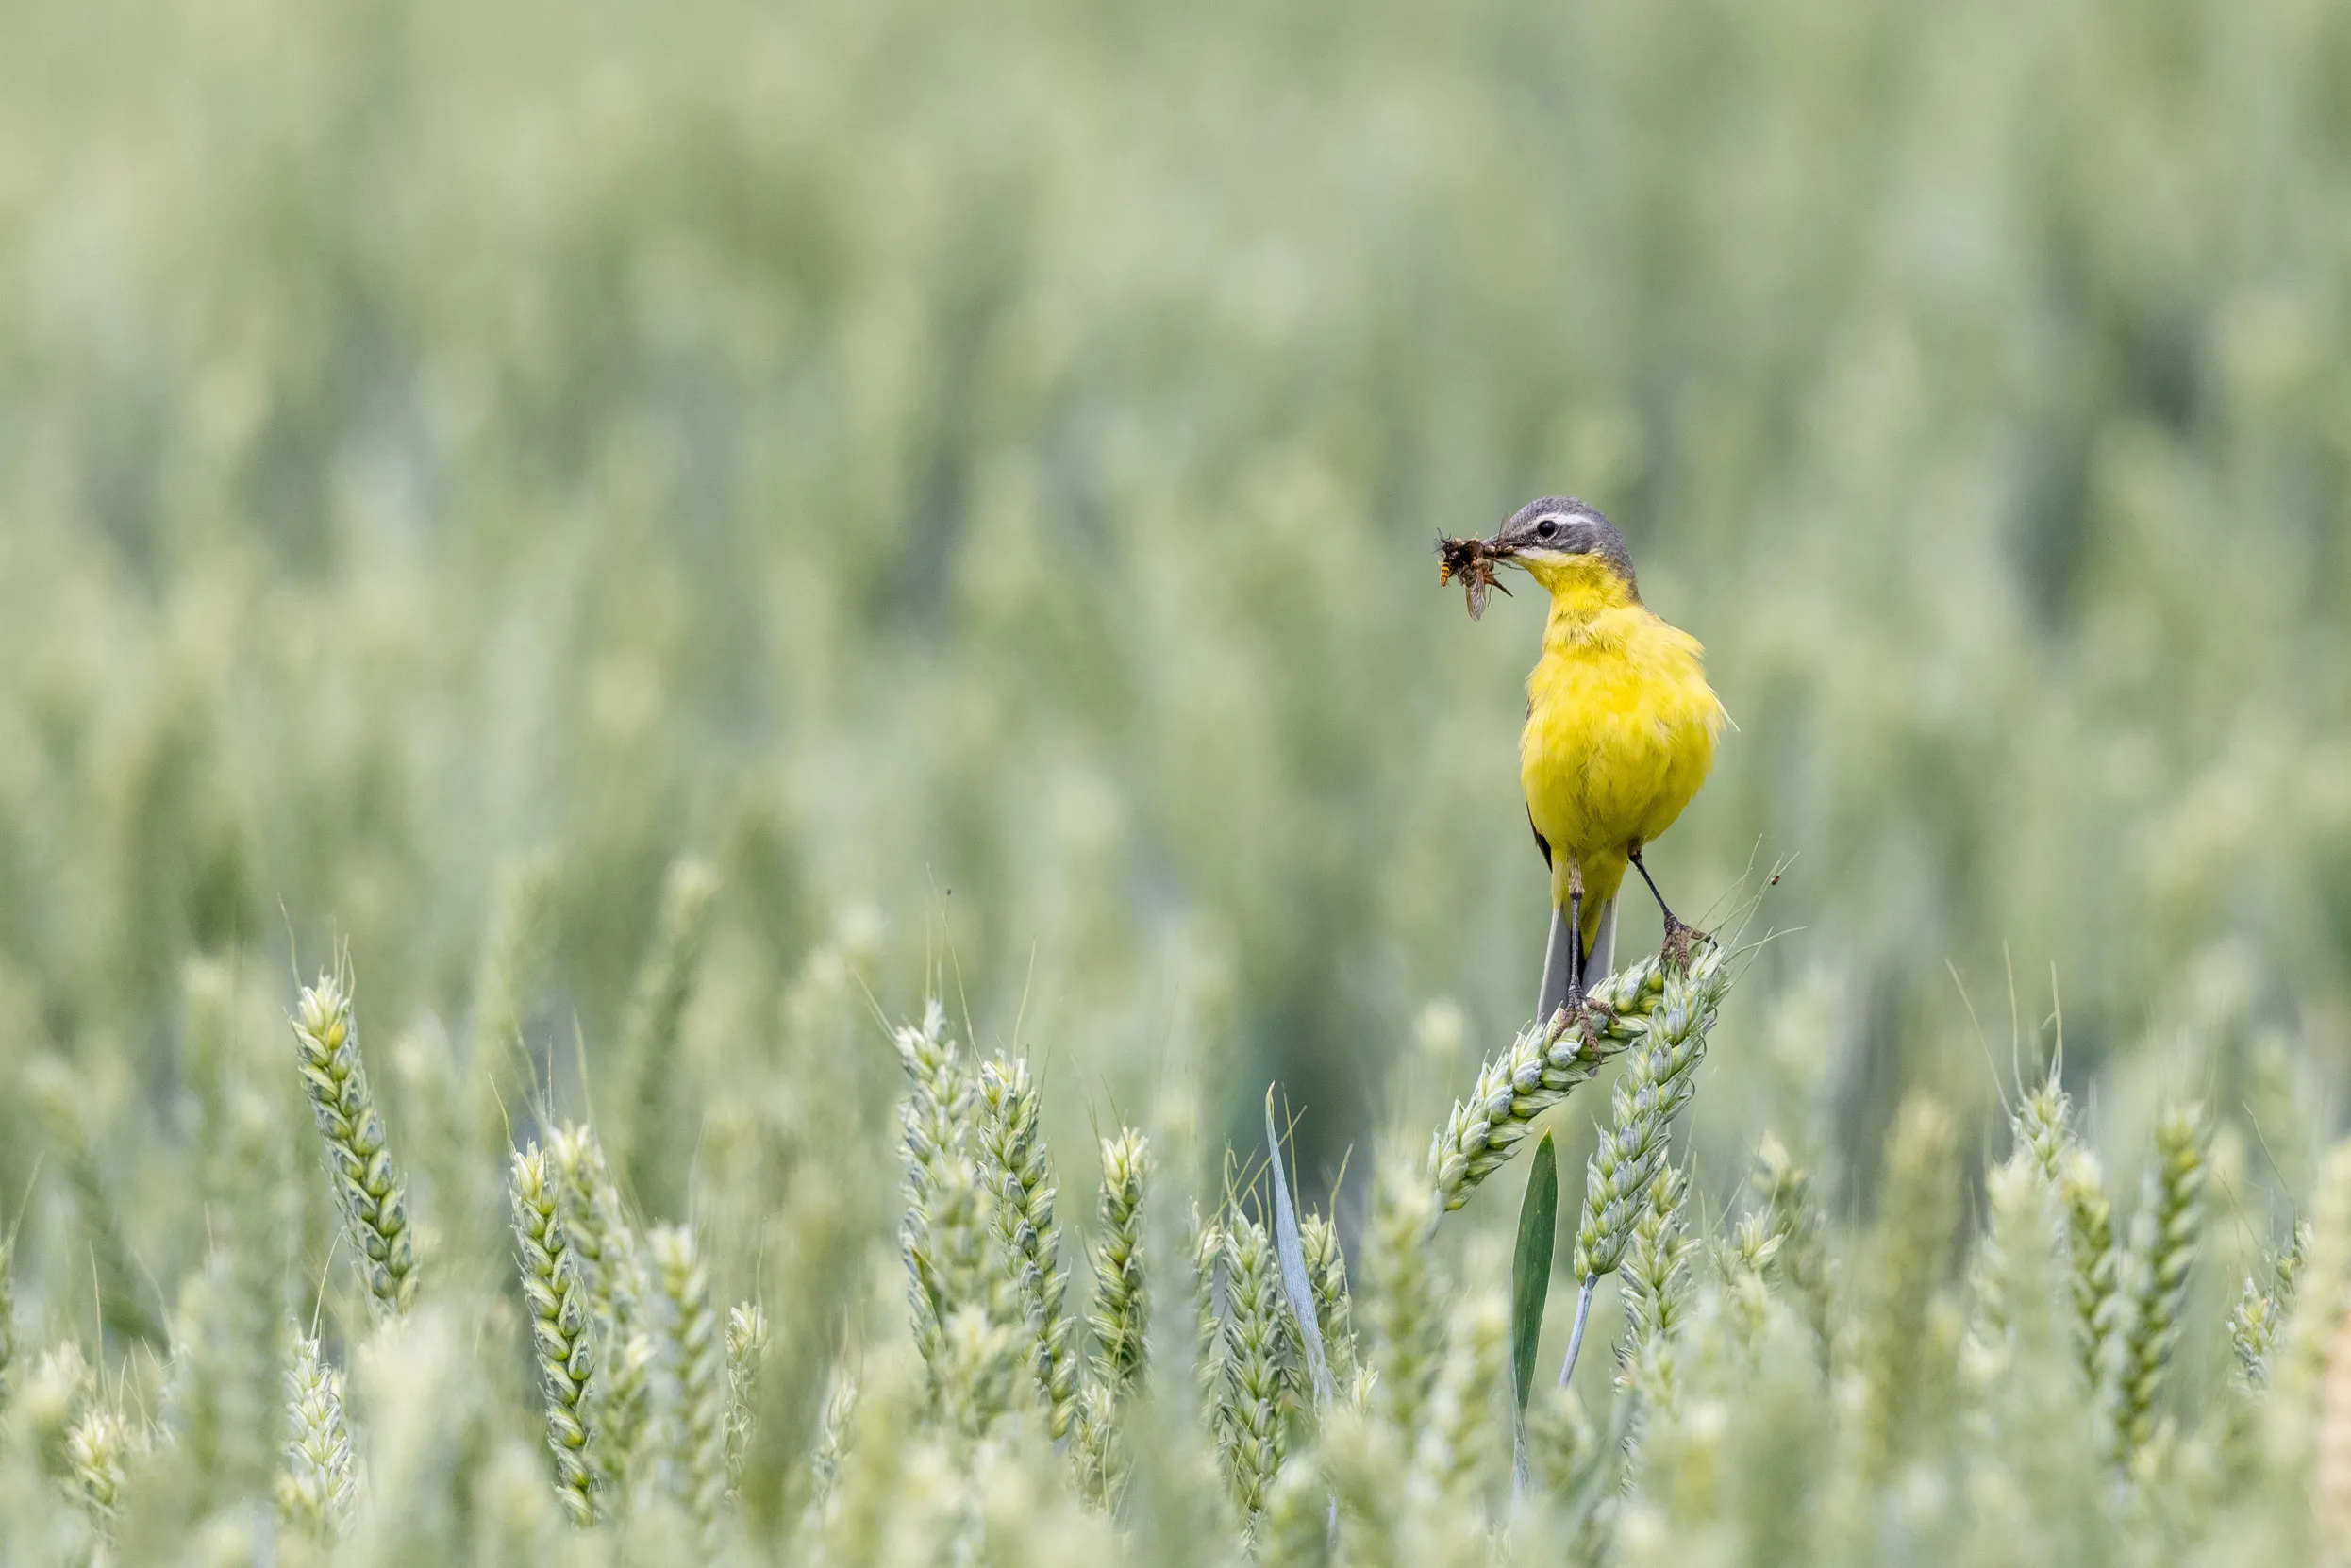 A male Yellow Wagtail stood in long grass with an insect in his beak.